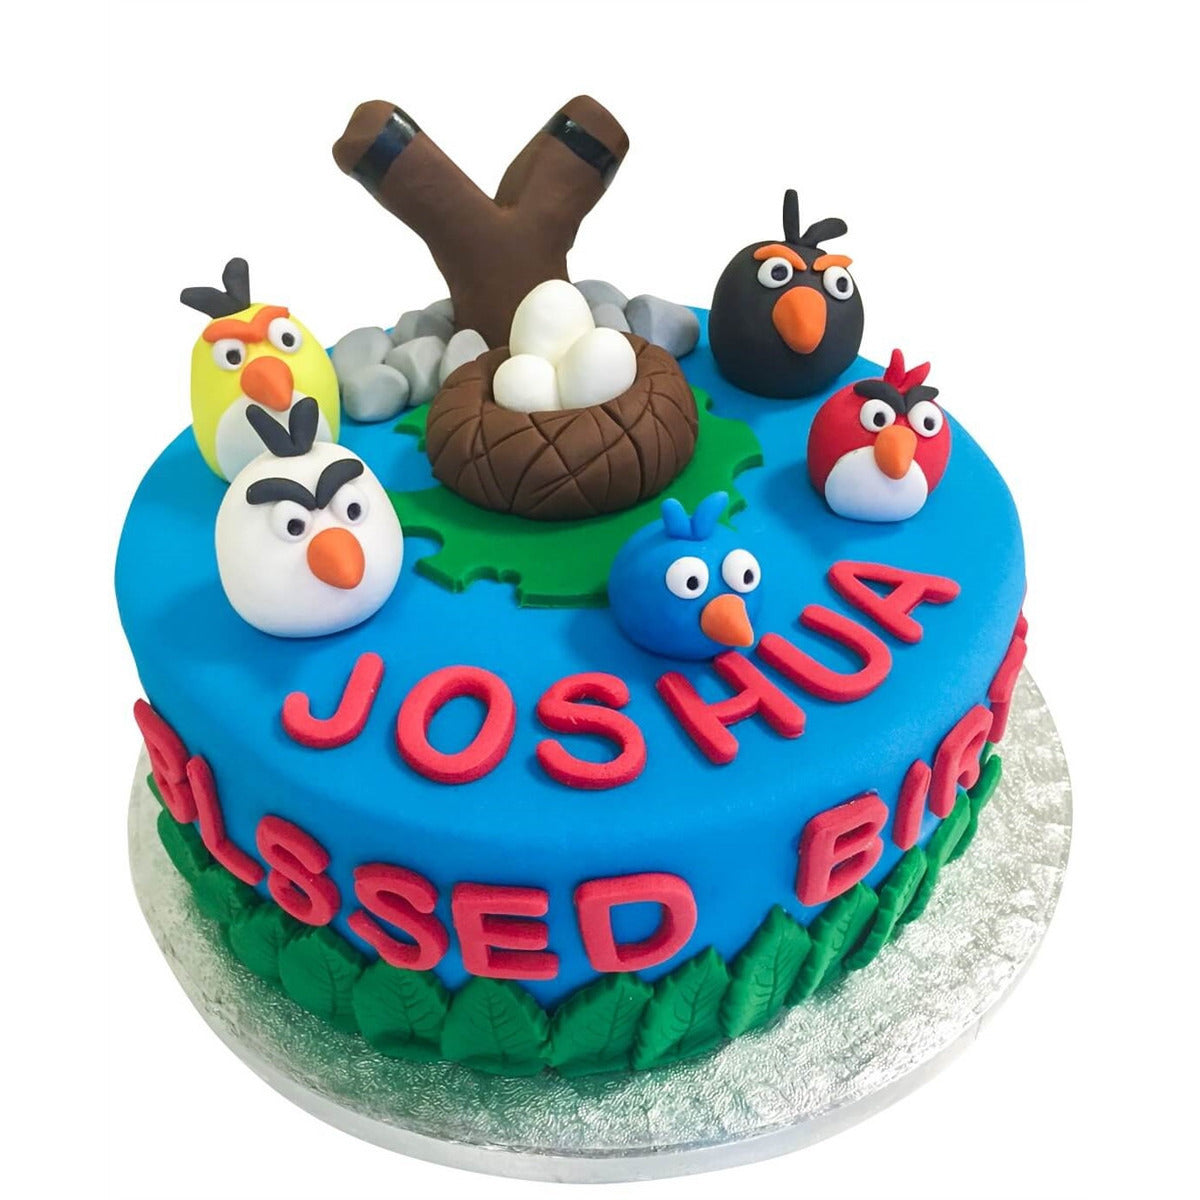 Angry Birds Layer Cake - Classy Girl Cupcakes